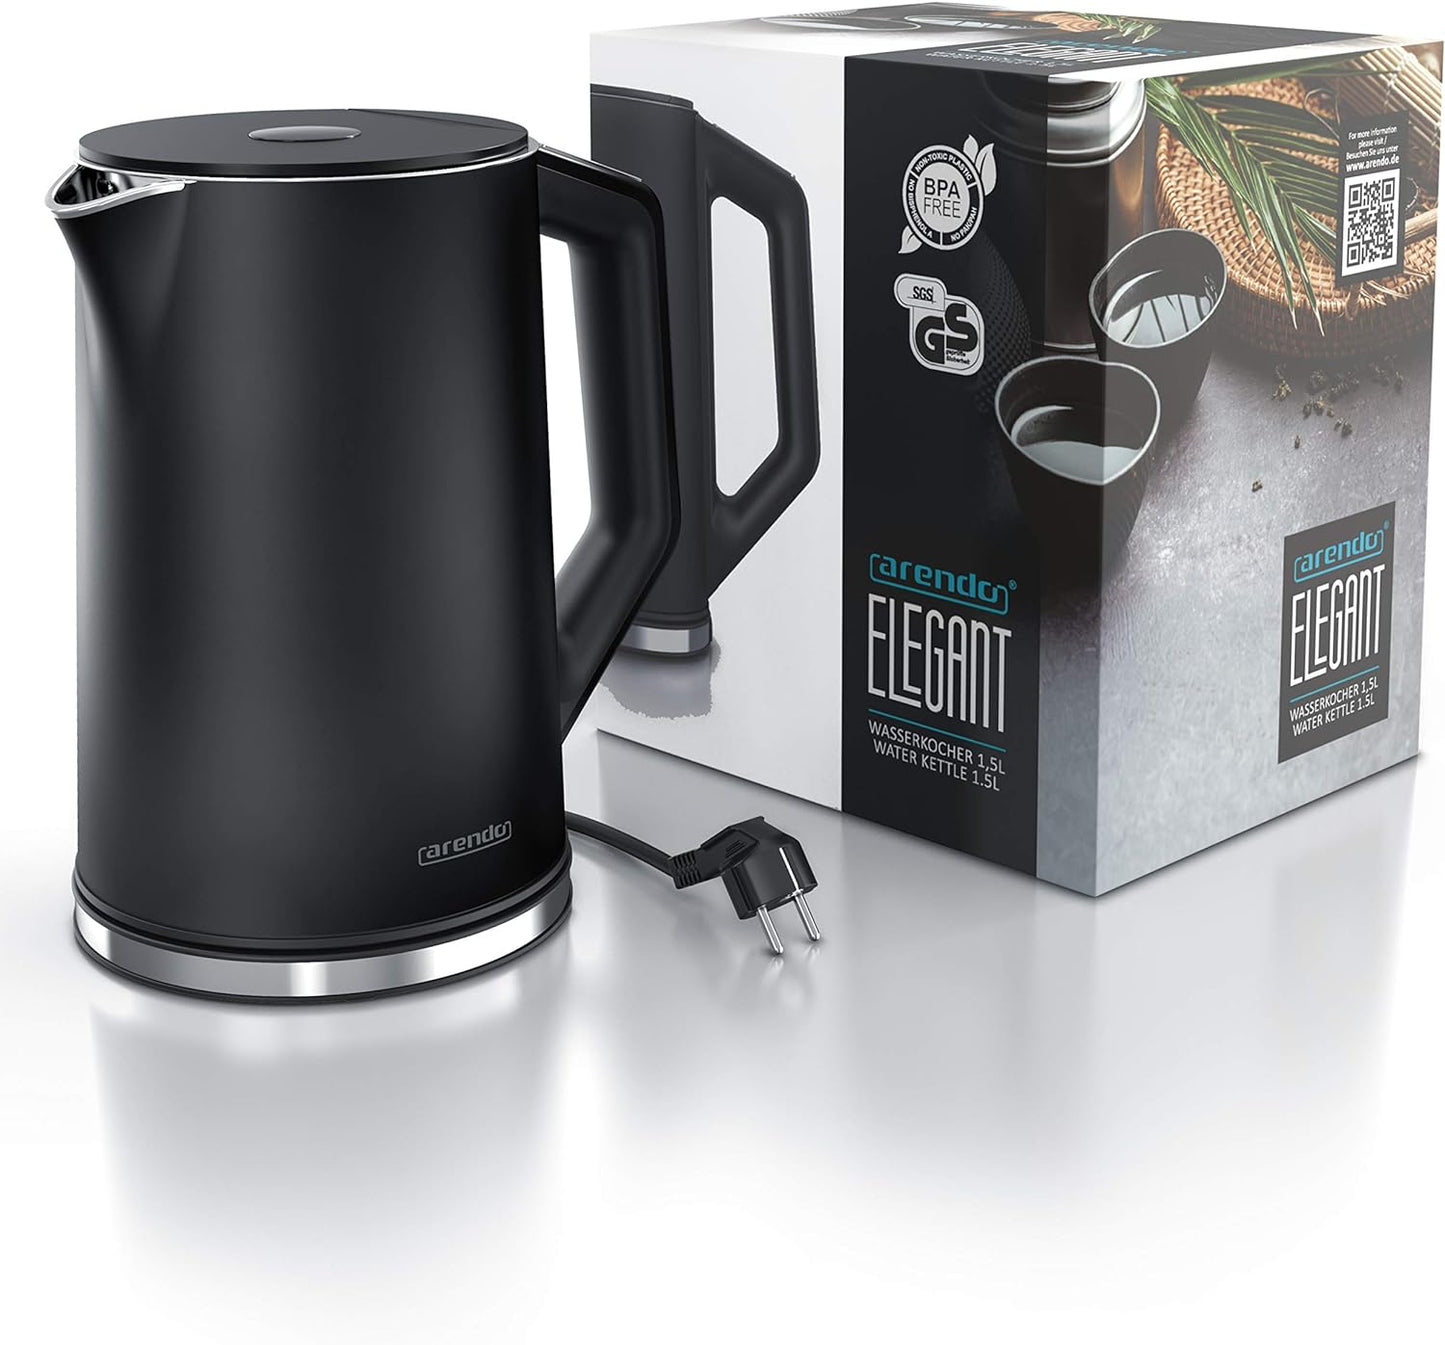 Arendo - Stainless steel kettle with temperature setting 40-100 degrees in 5 steps - Double wall design - Elegant model - 1.5 litres - 2200 W - Tea kettle with temperature display - GS - Black